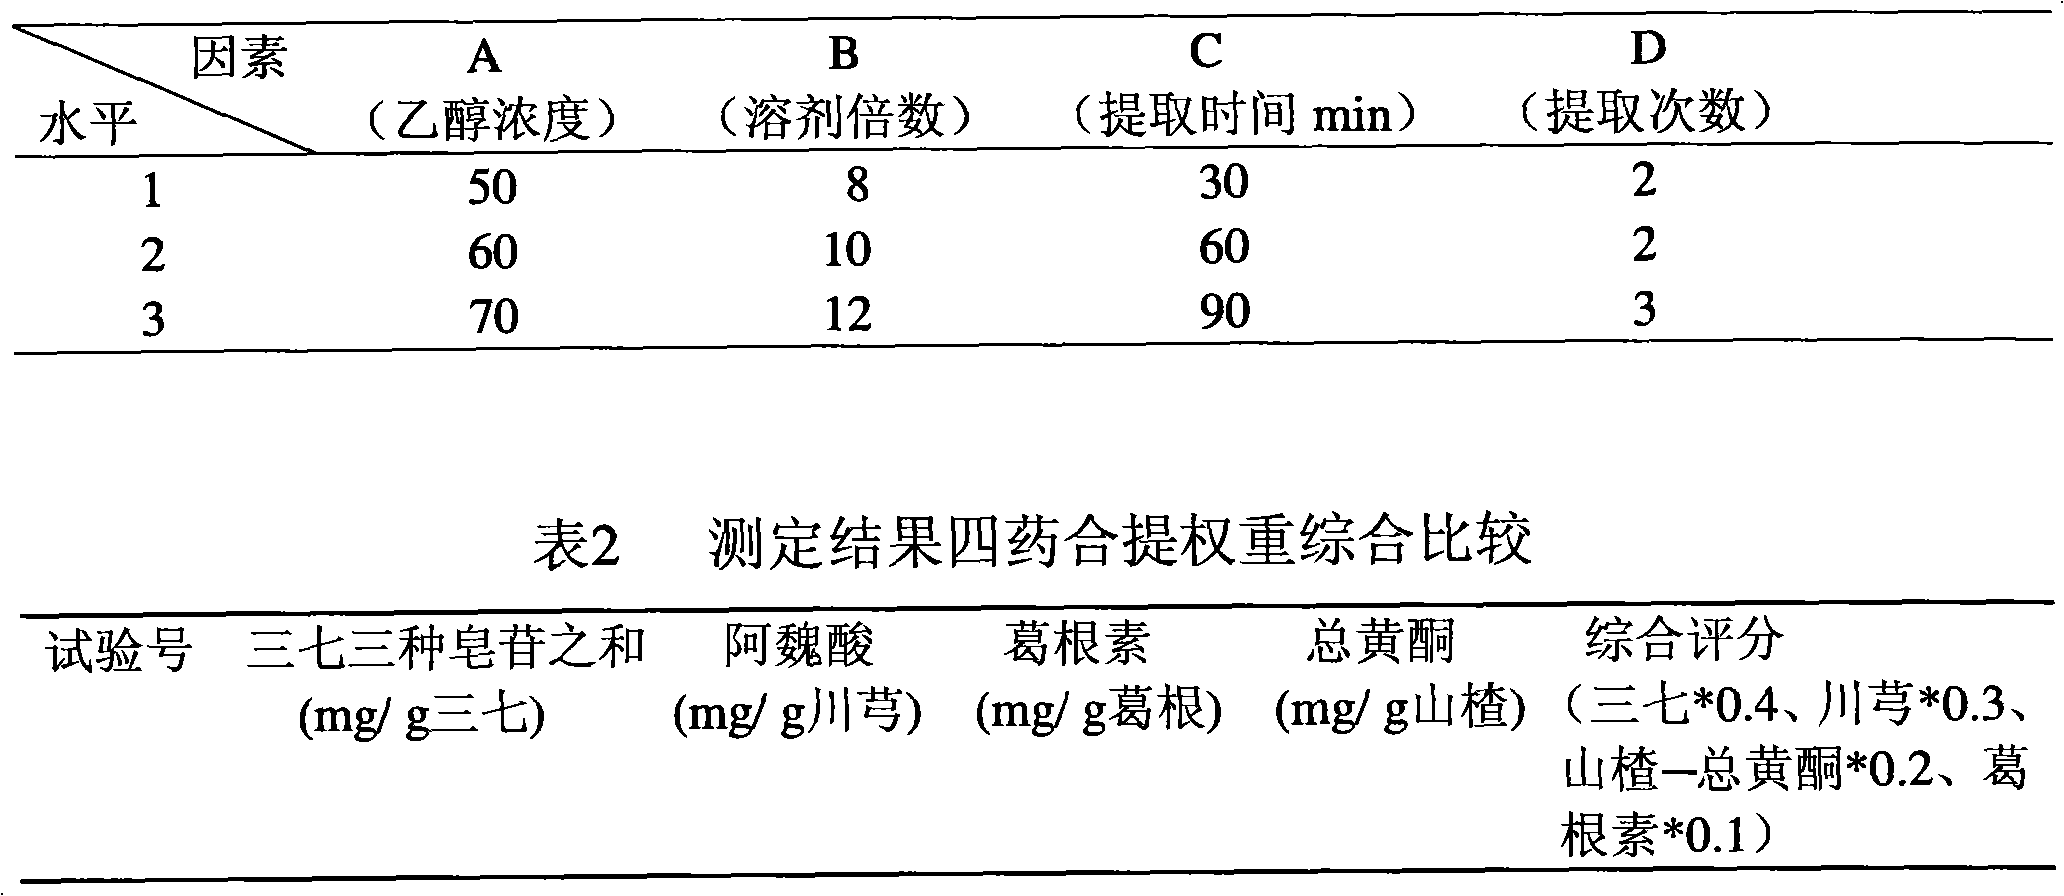 Method for purifying active ingredients of compound Naodesheng